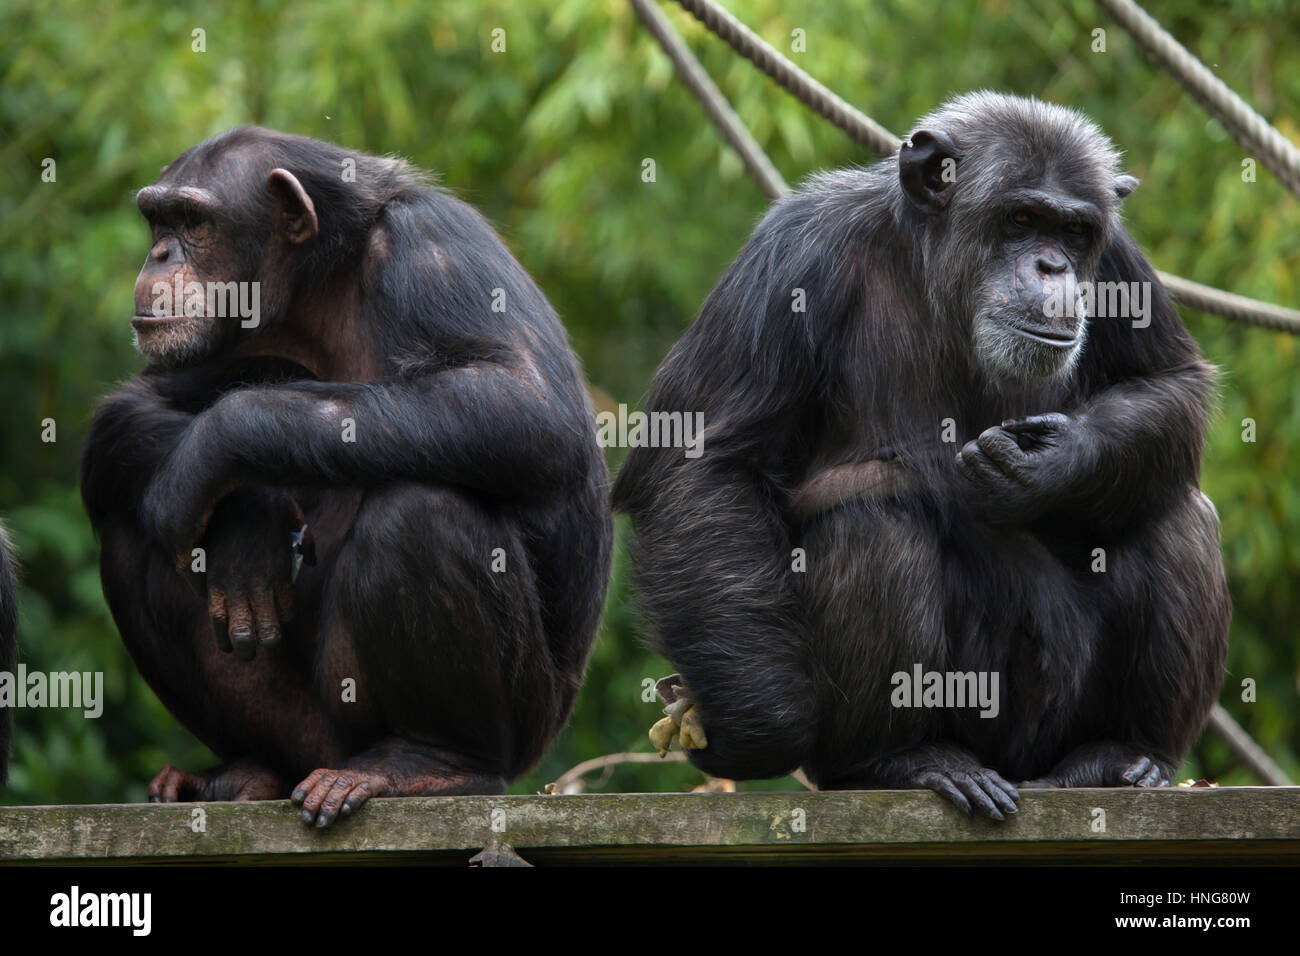 Common chimpanzee (Pan troglodytes), also known as the robust chimpanzee at La Fleche Zoo in the Loire Valley, France. Stock Photo